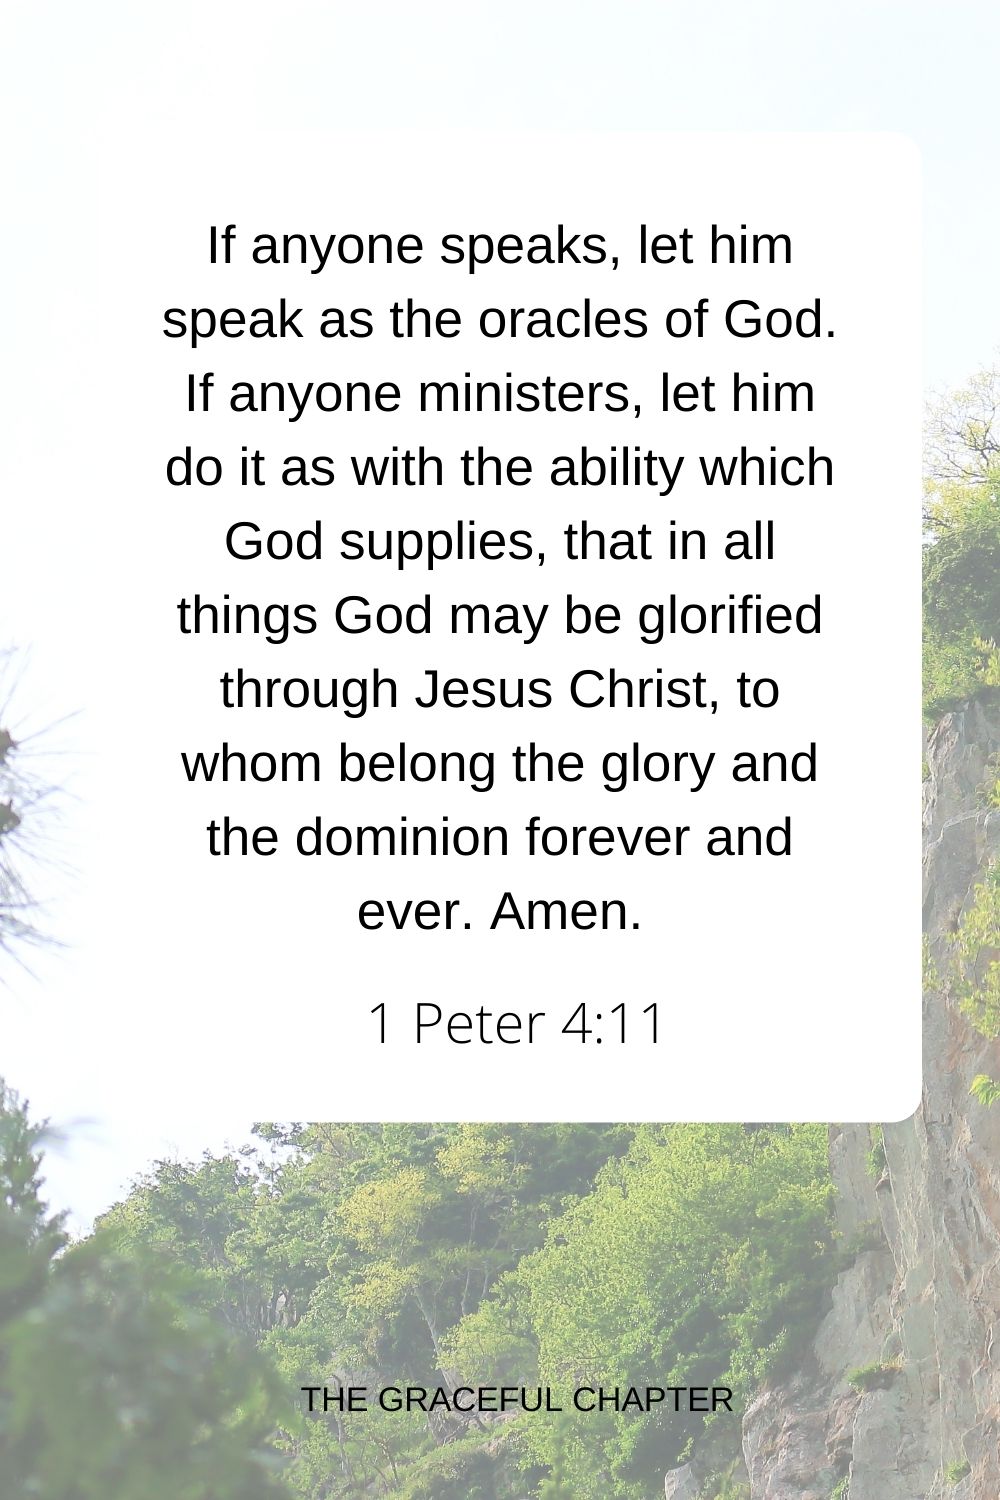 If anyone speaks, let him speak as the oracles of God. If anyone ministers, let him do it as with the ability which God supplies, that in all things God may be glorified through Jesus Christ, to whom belong the glory and the dominion forever and ever. Amen. 1 Peter 4:11